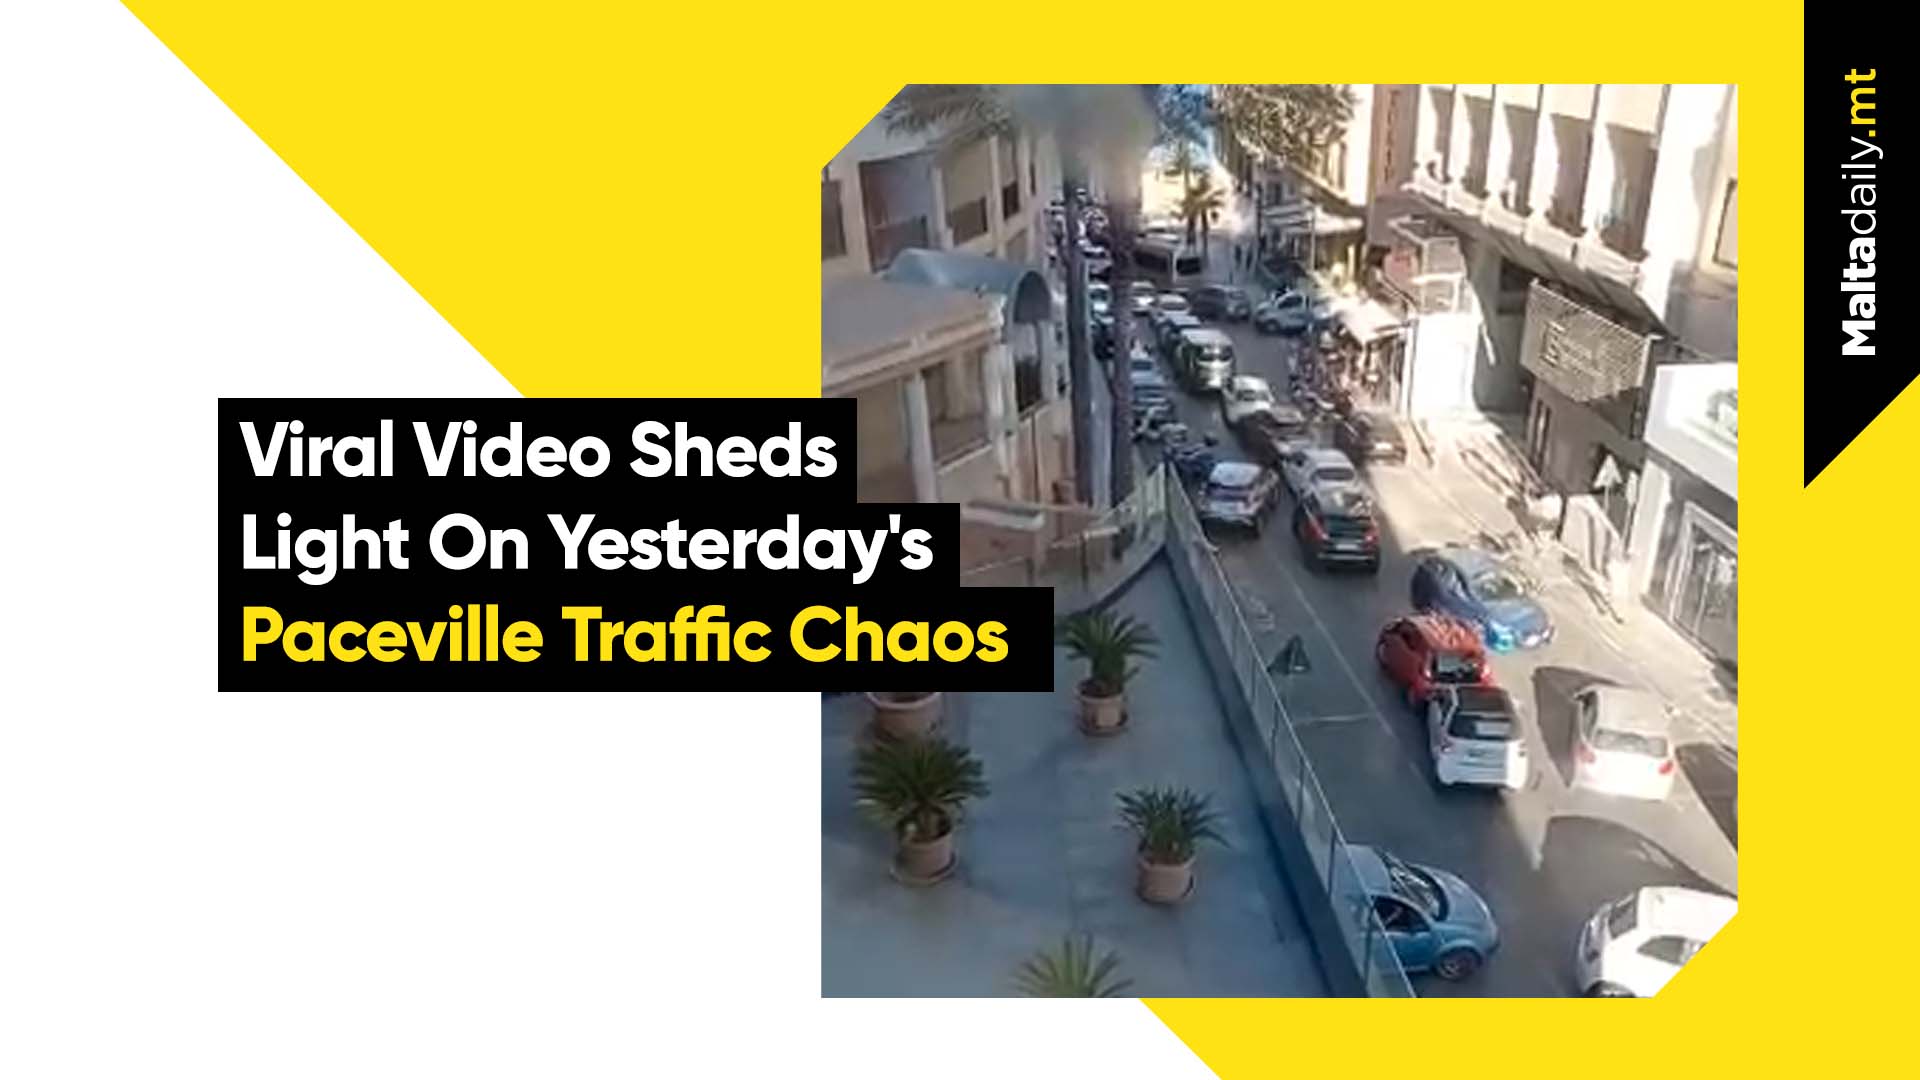 Viral Video Sheds Light On Yesterday's Paceville Traffic Chaos